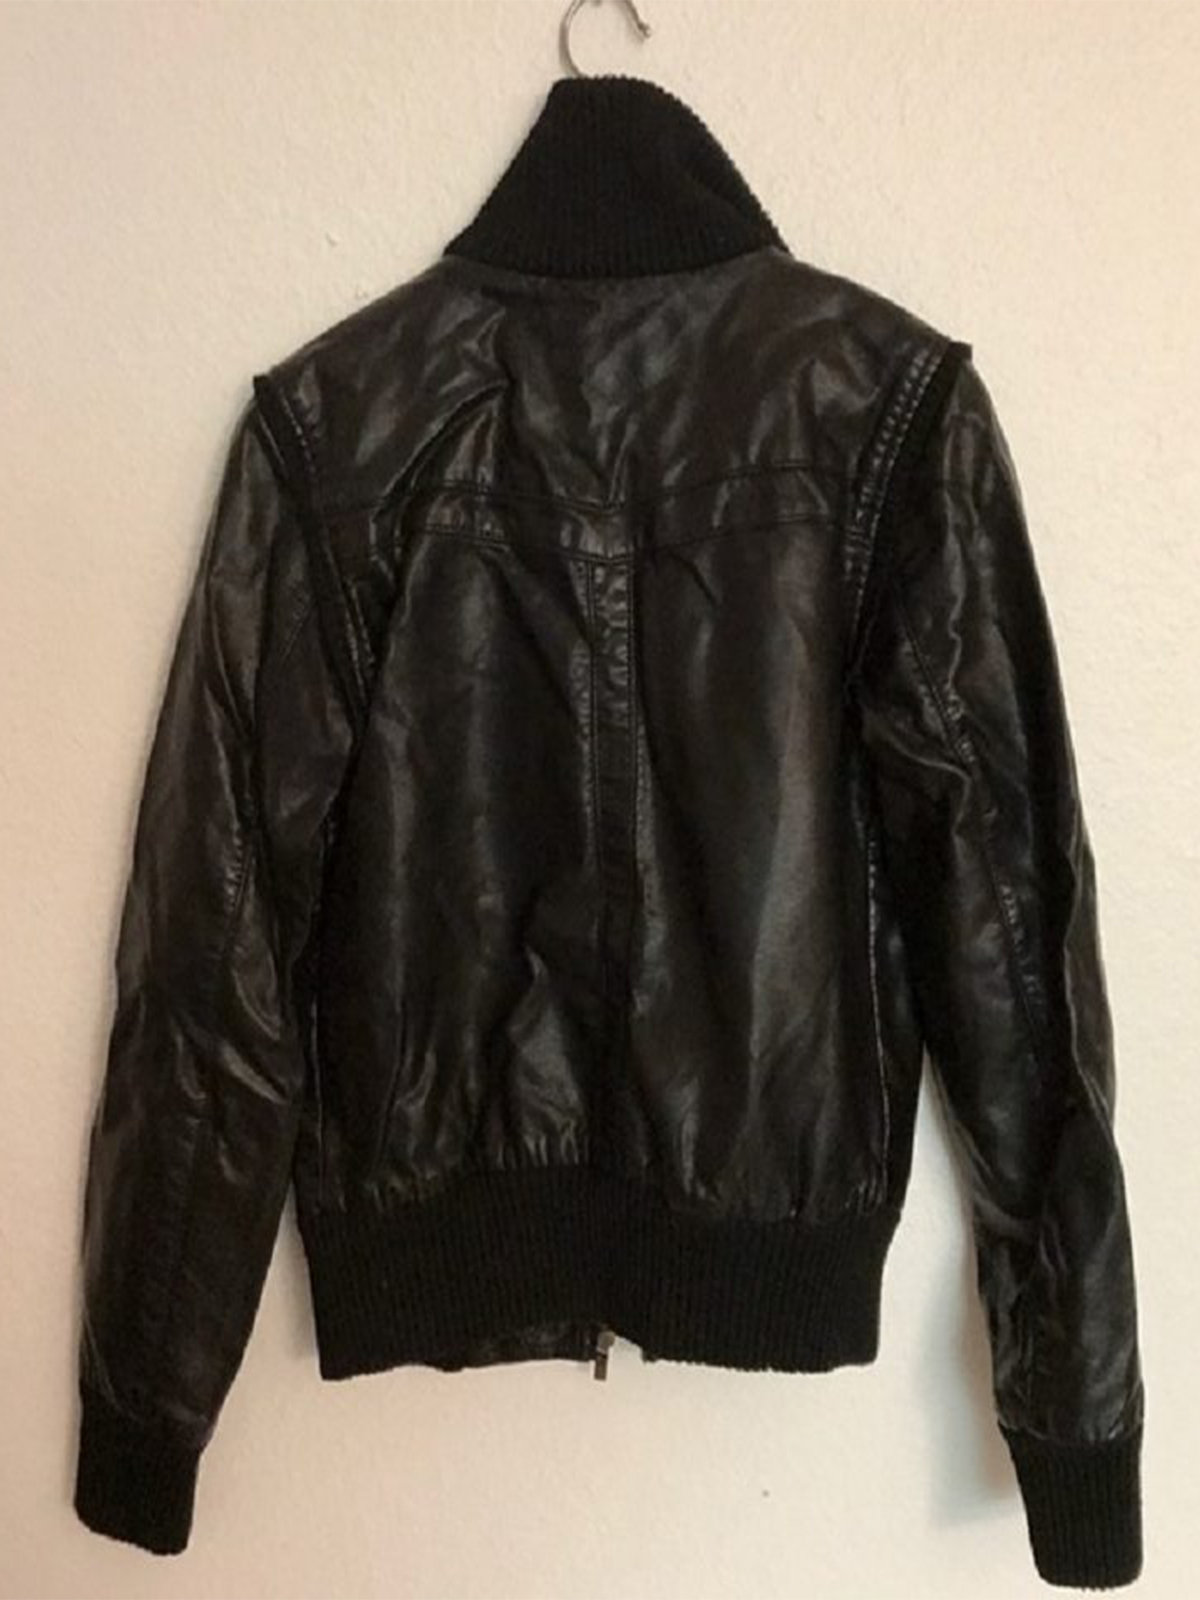 Urban Outfitters Black Leather Jacket